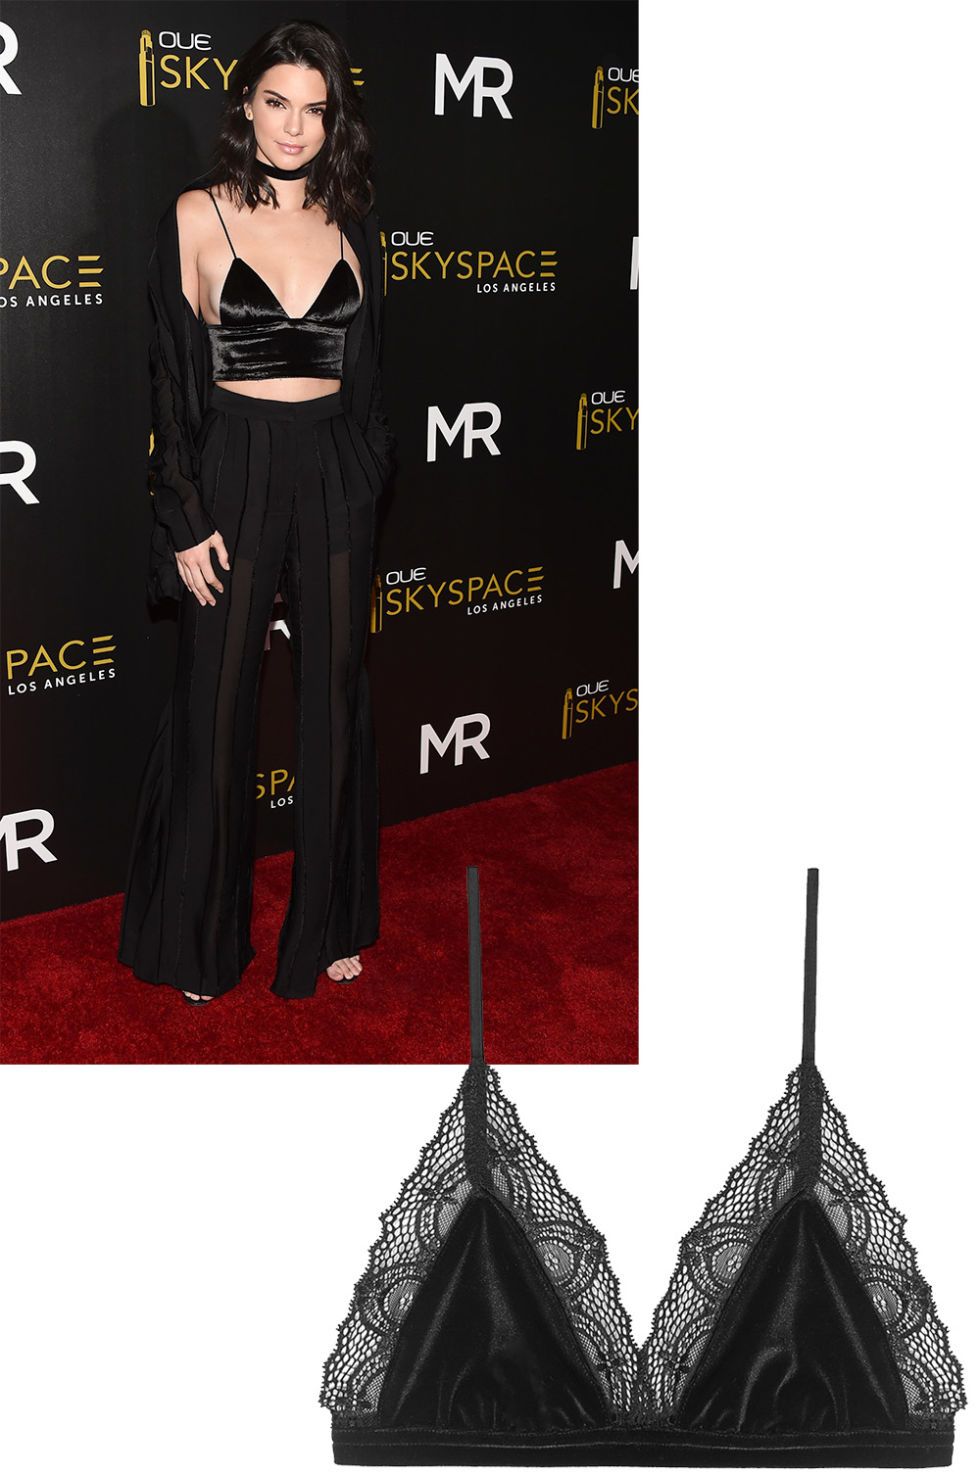 <p>Kendall Jenner is on board for a textural bralet.</p><p><em data-redactor-tag="em" data-verified="redactor">Anine Bing bra, $89</em><span class="redactor-invisible-space" data-verified="redactor" data-redactor-tag="span" data-redactor-class="redactor-invisible-space"><em data-redactor-tag="em" data-verified="redactor">, <a href="https://www.aninebing.com/collections/lingerie/products/velvet-bra-with-lace-trim" target="_blank">anniebing.com</a>.&nbsp;</em></span></p>